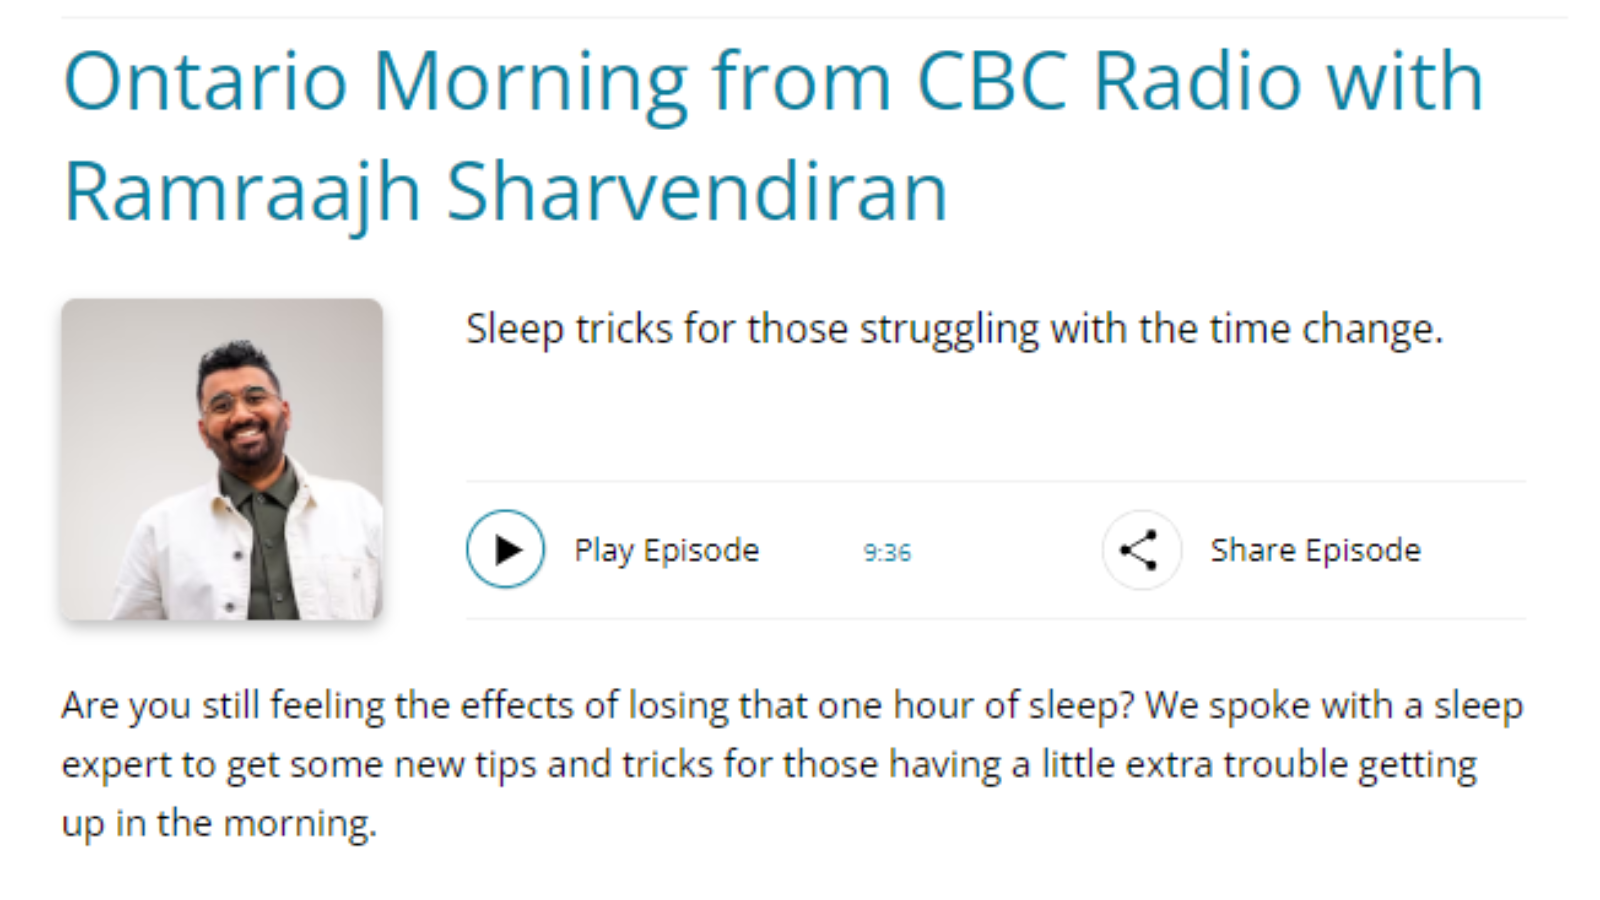 Ontario Morning from CBC Radio with Ramraajh Sharvendiran Sleep tricks for those struggling with the time change.  Play Episode 9:36 Share Episode Are you still feeling the effects of losing that one hour of sleep? We spoke with a sleep expert to get some new tips and tricks for those having a little extra trouble getting up in the morning.